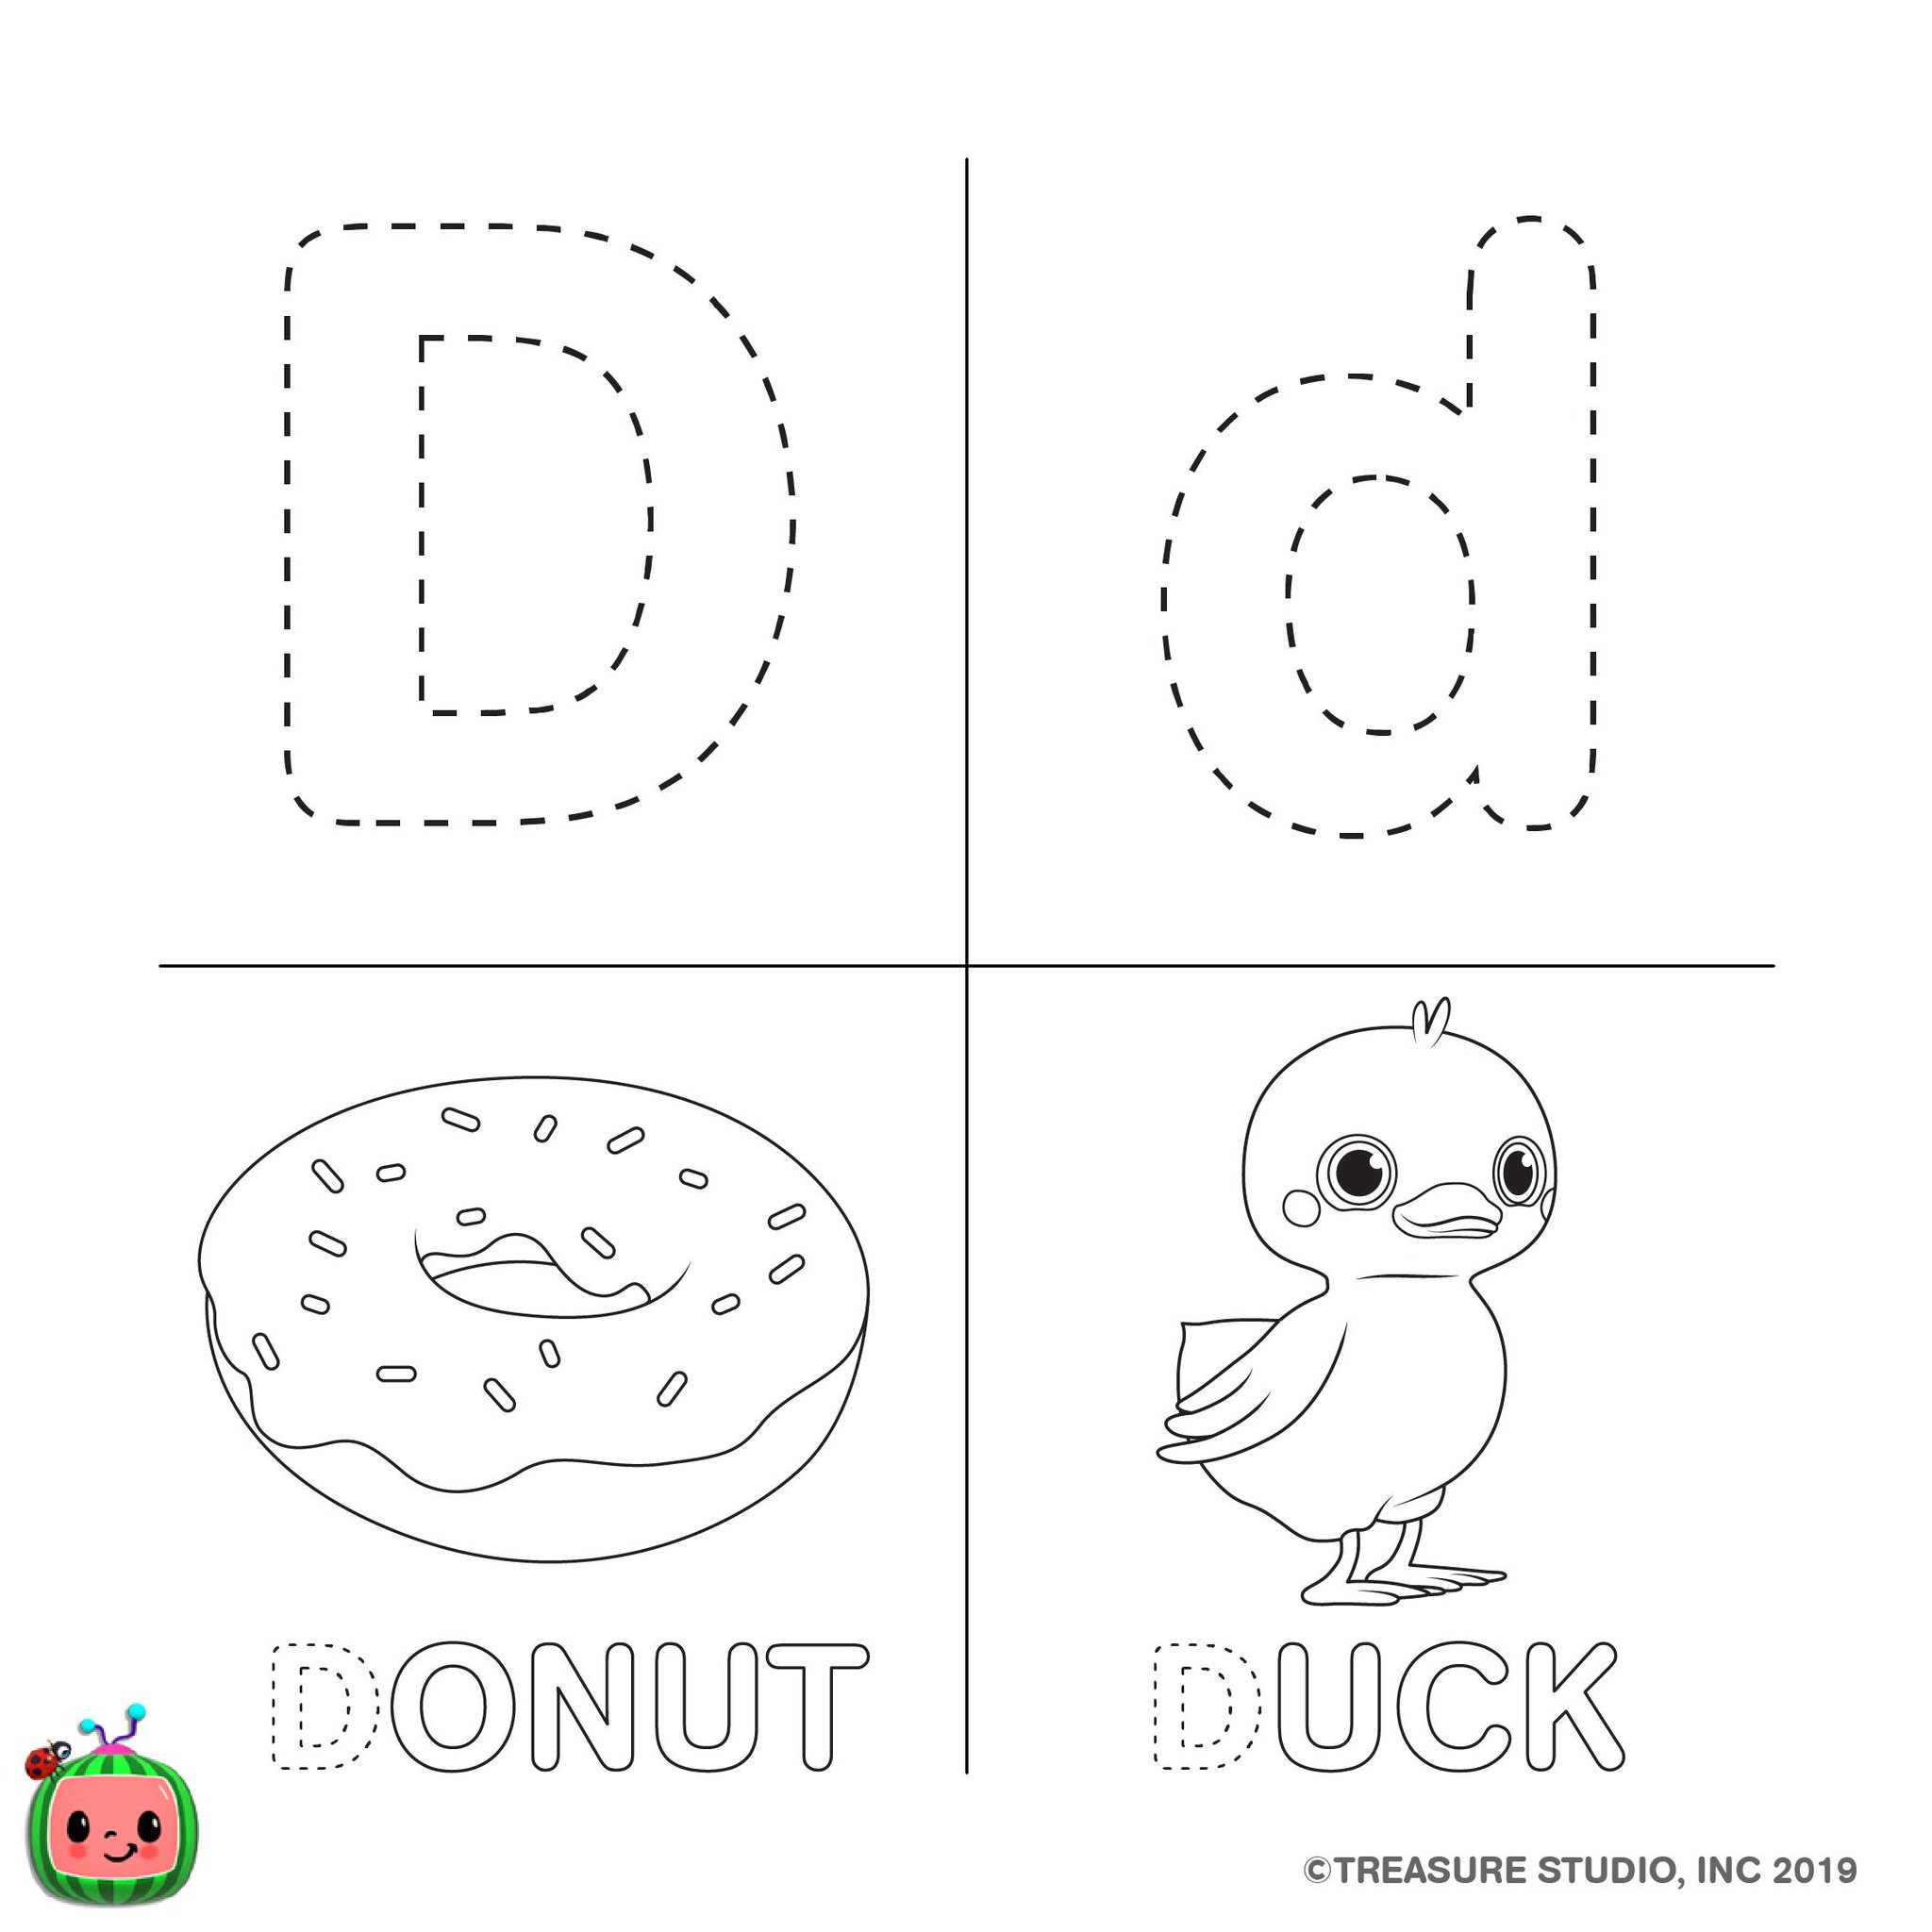 Cocomelon On Twitter Let S Learn Abcs With Cocomelon Today S Letter Is D Enjoy Our New Coloring Page While Watching Our Video Learn The Abcs D Is For Duck Https T Co Xohsymjyuu To Download